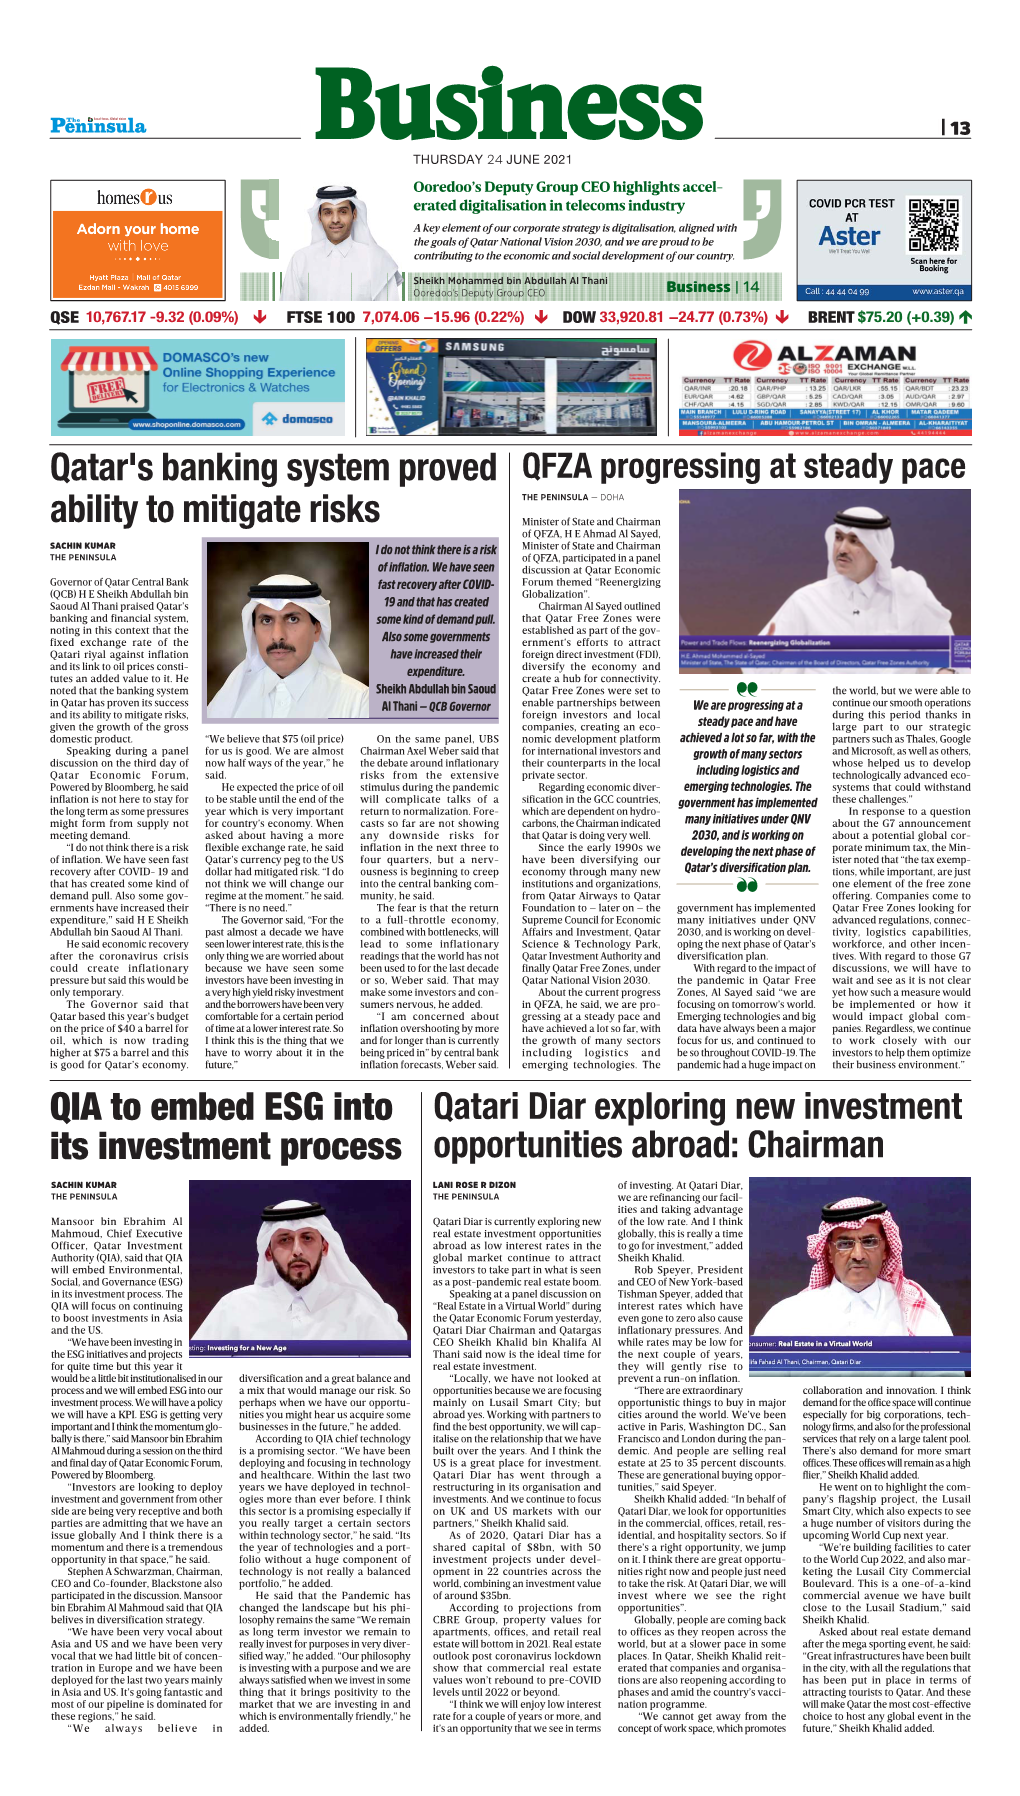 Qatar's Banking System Proved Ability to Mitigate Risks QIA to Embed ESG